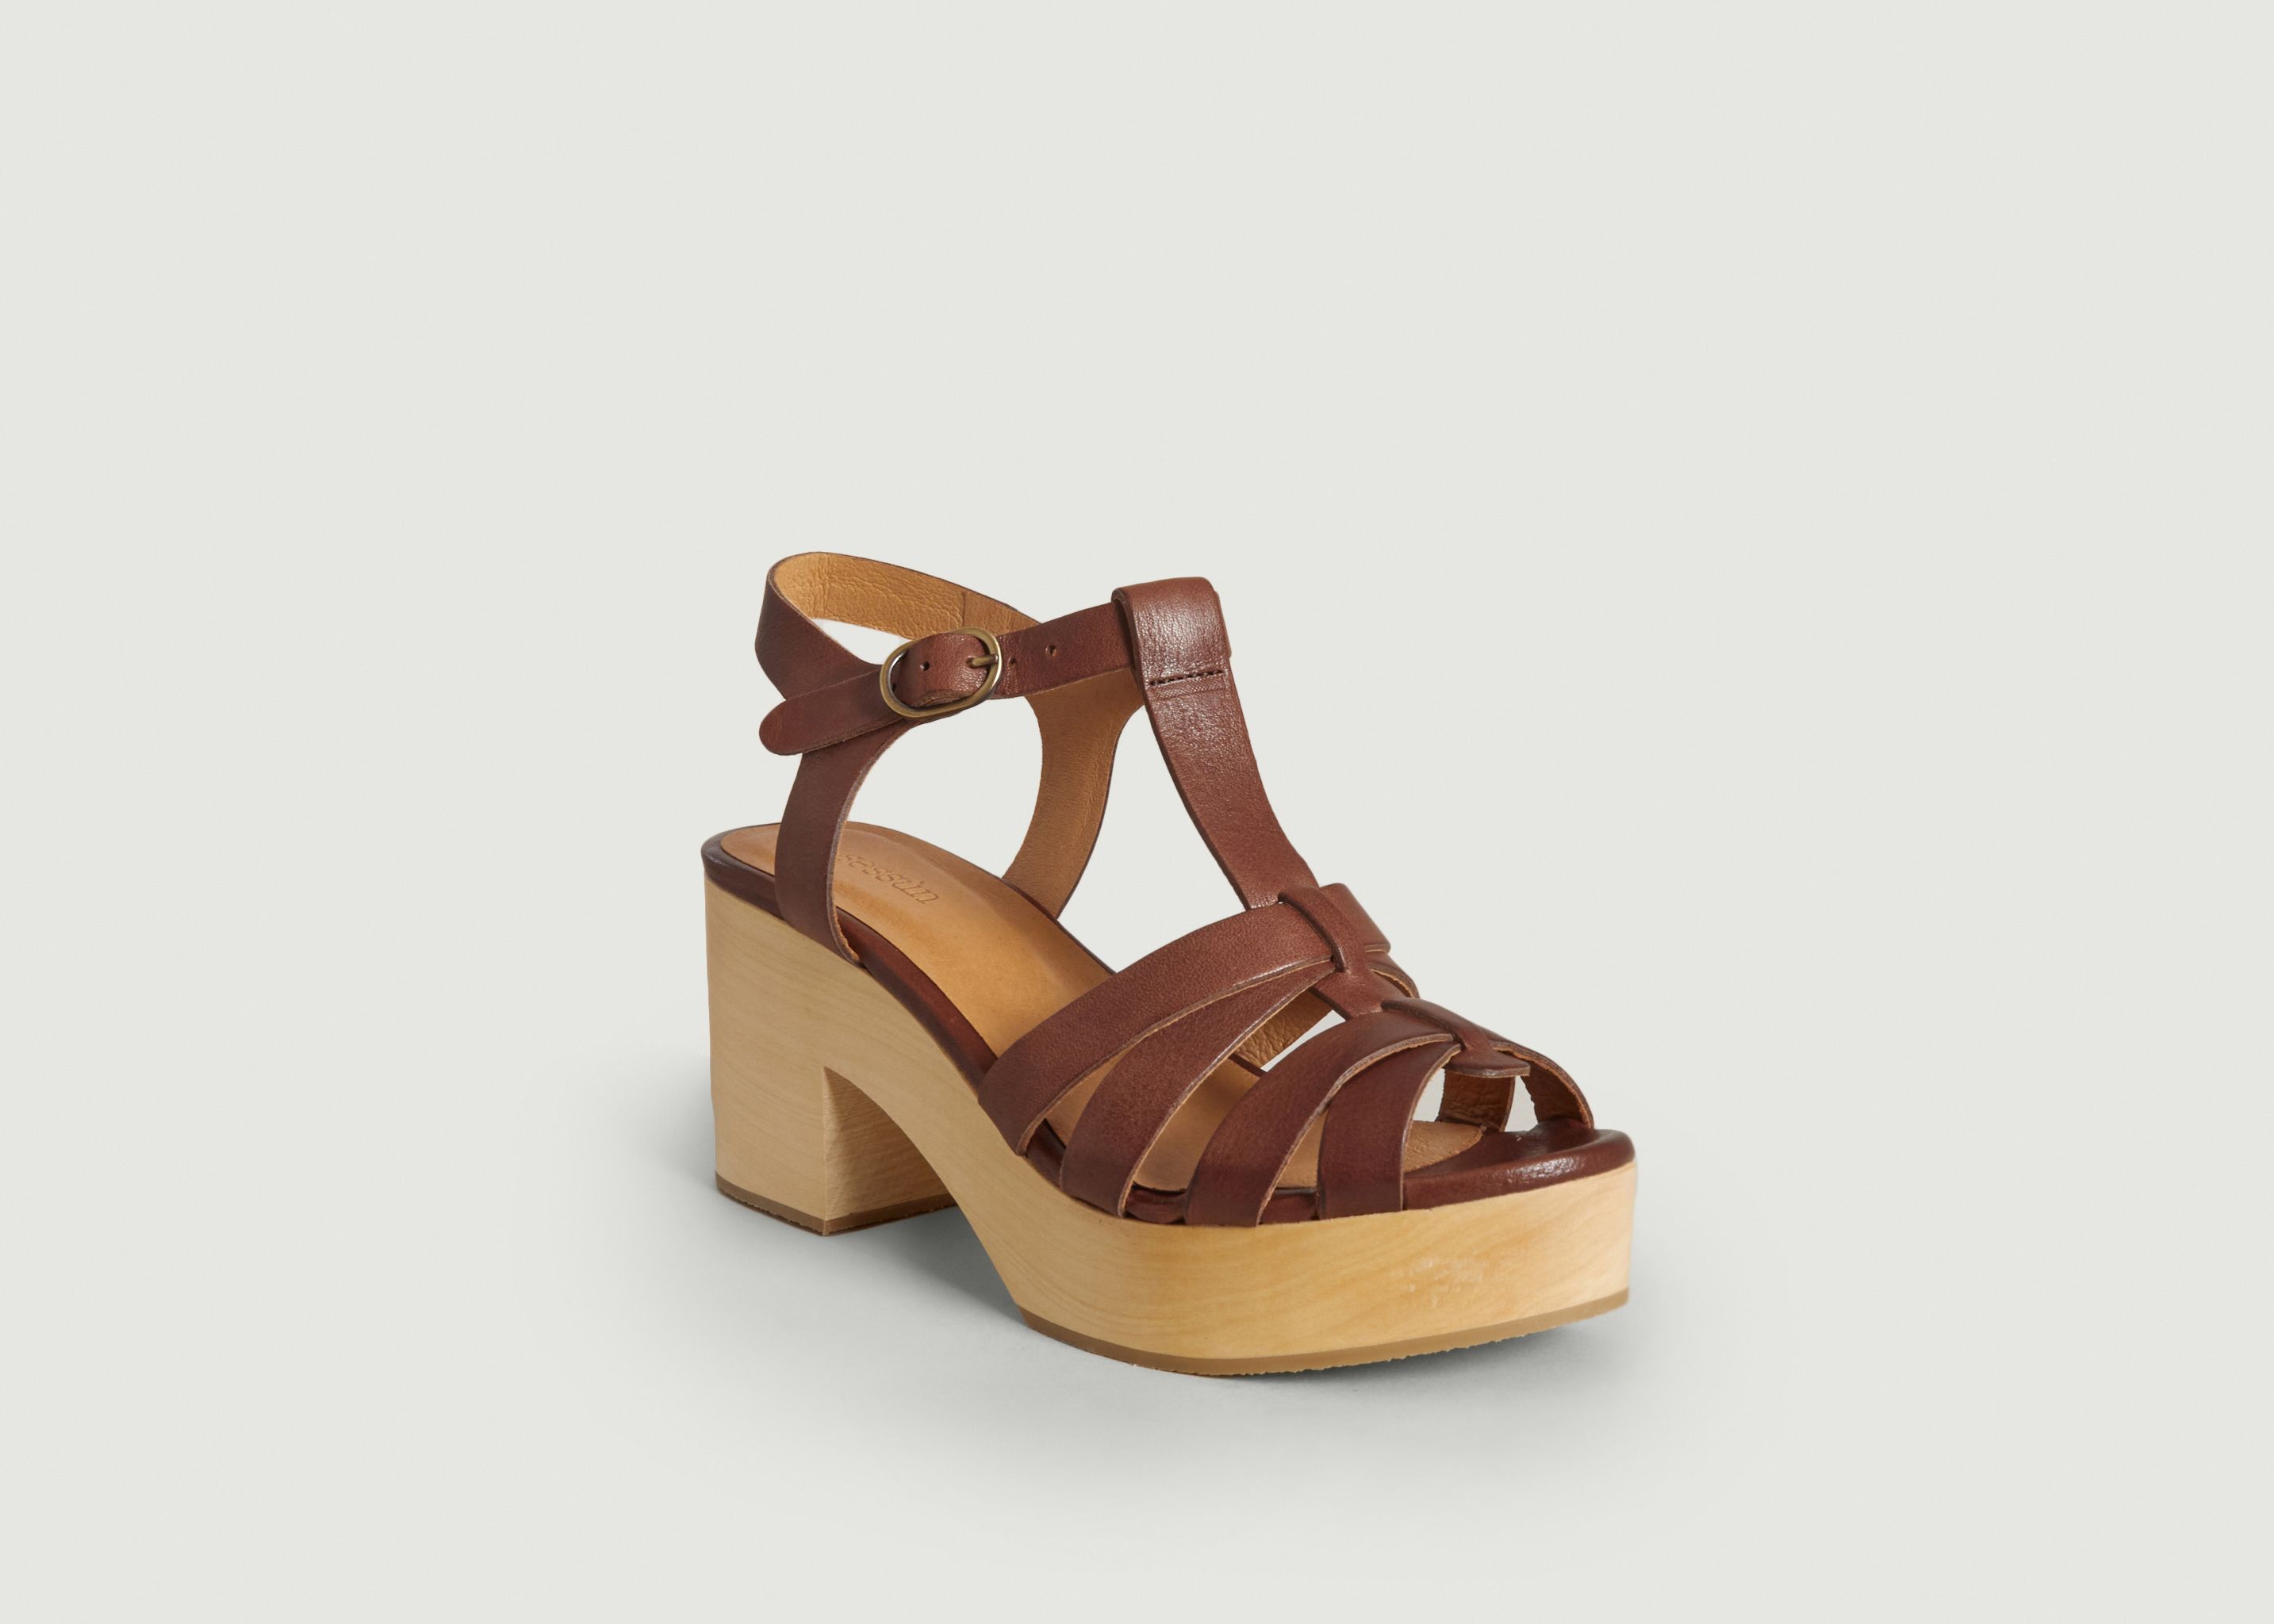 Leather and wood sandals Stipa - Sessun